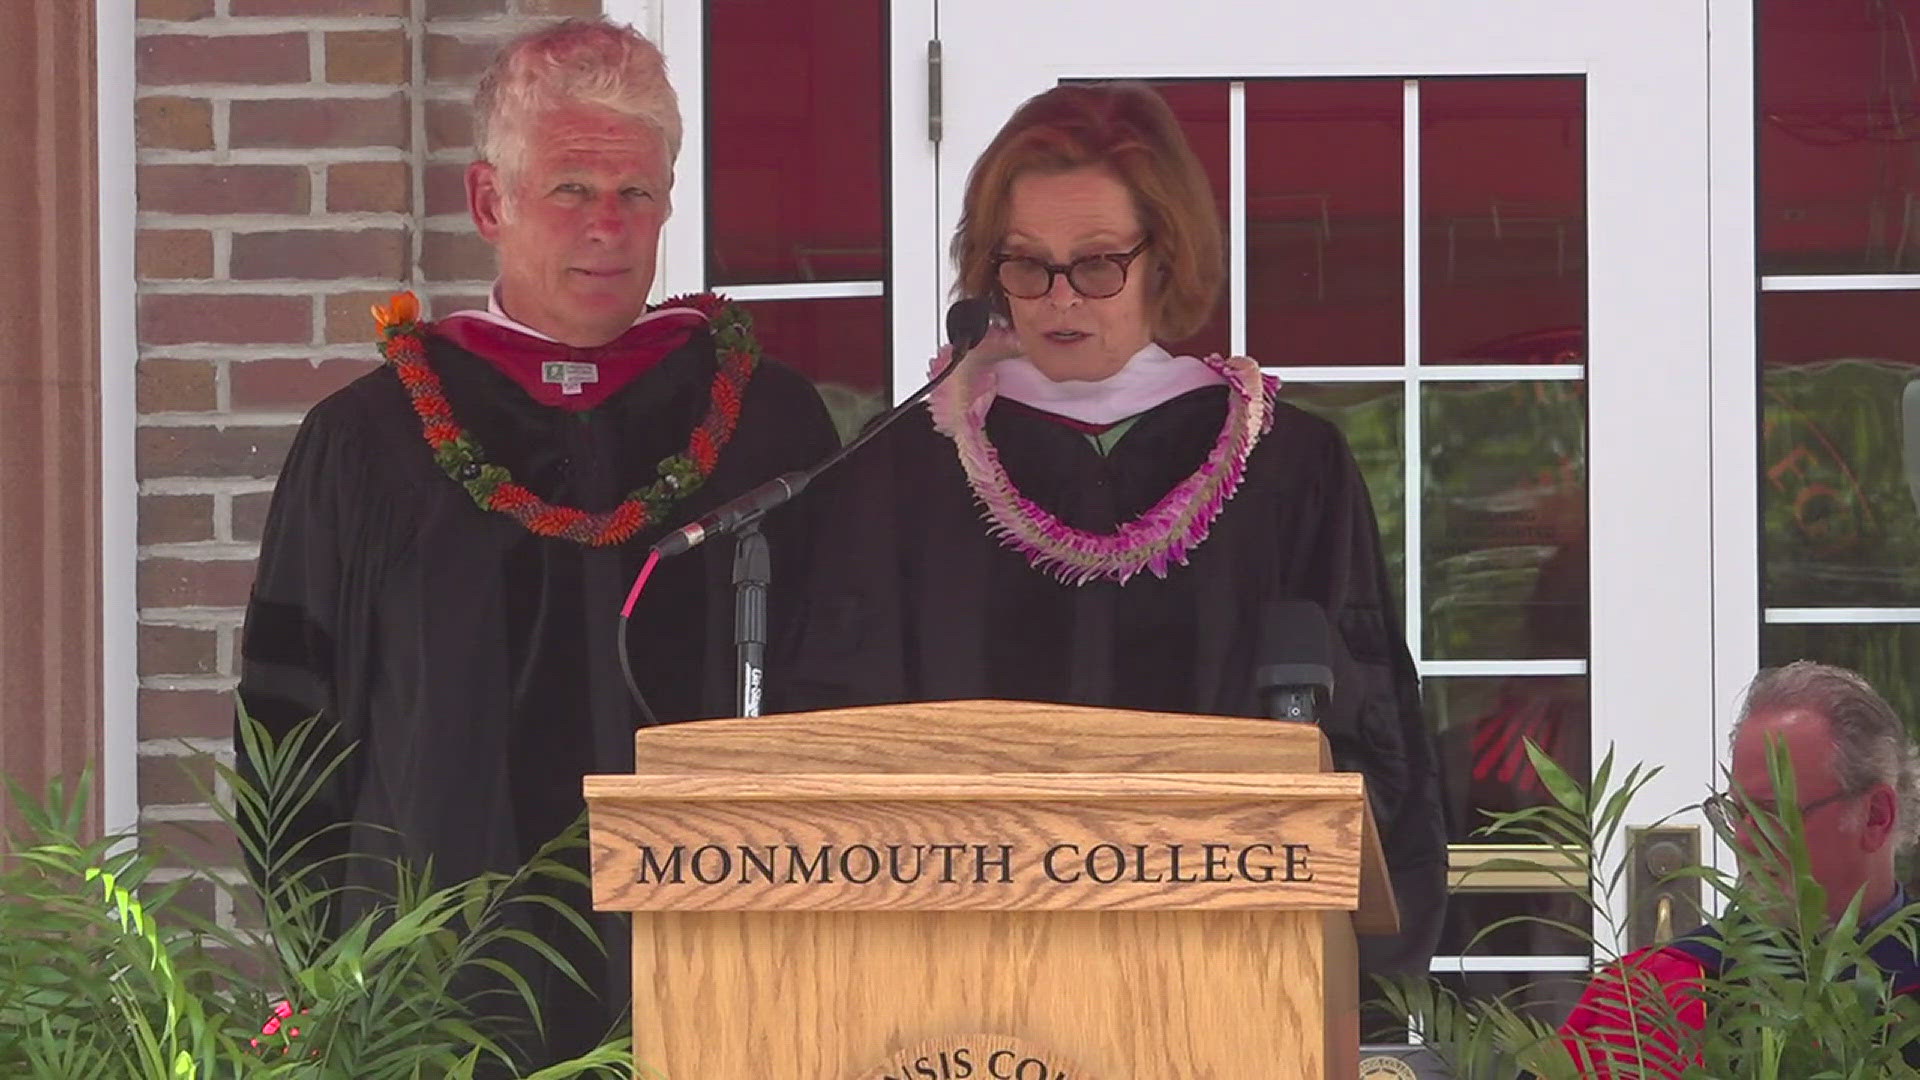 Sigourney Weaver and Jim Simpson earned honorary doctorates from Monmouth for their efforts in the arts and philanthropy.